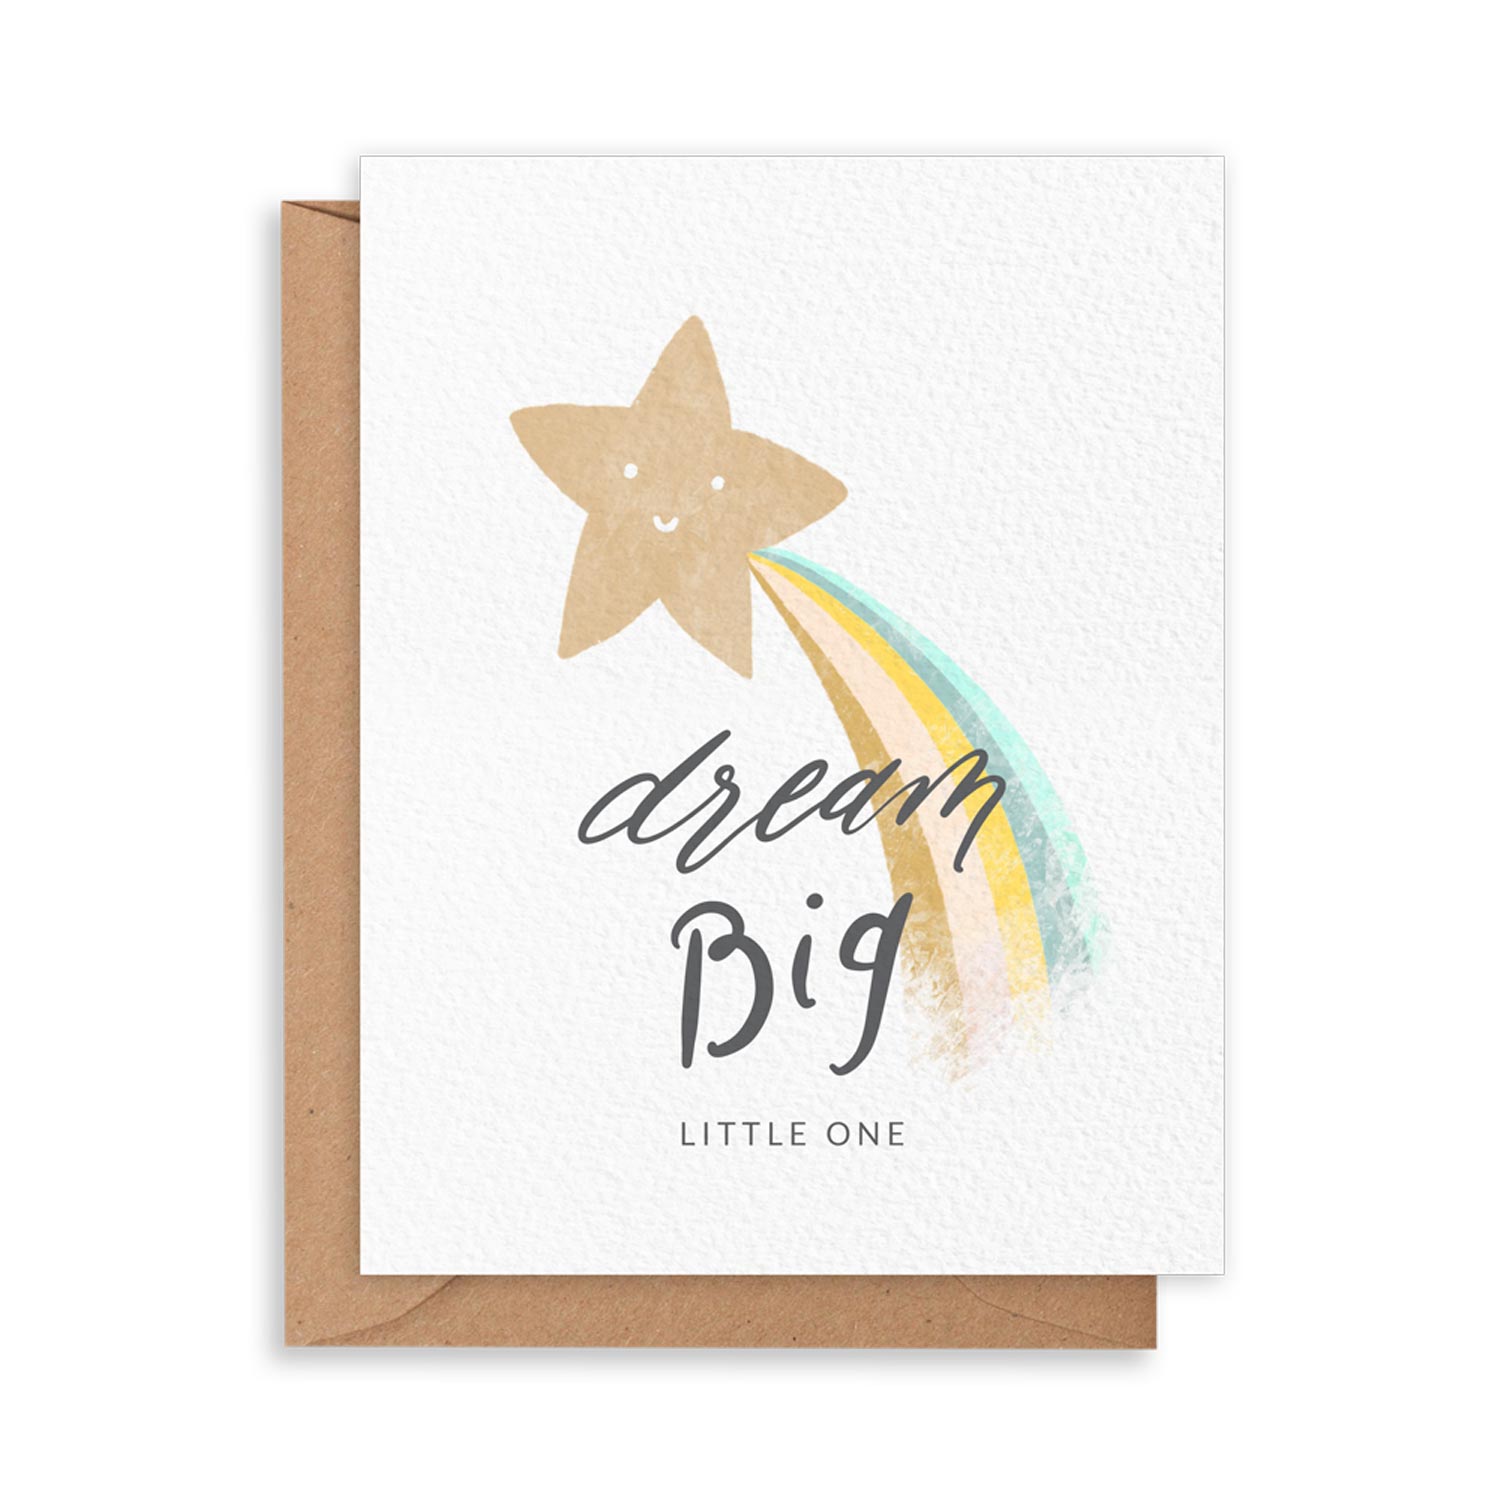 Greeting card with a sparkly shooting star wishing for big hopes and dreams for a little one